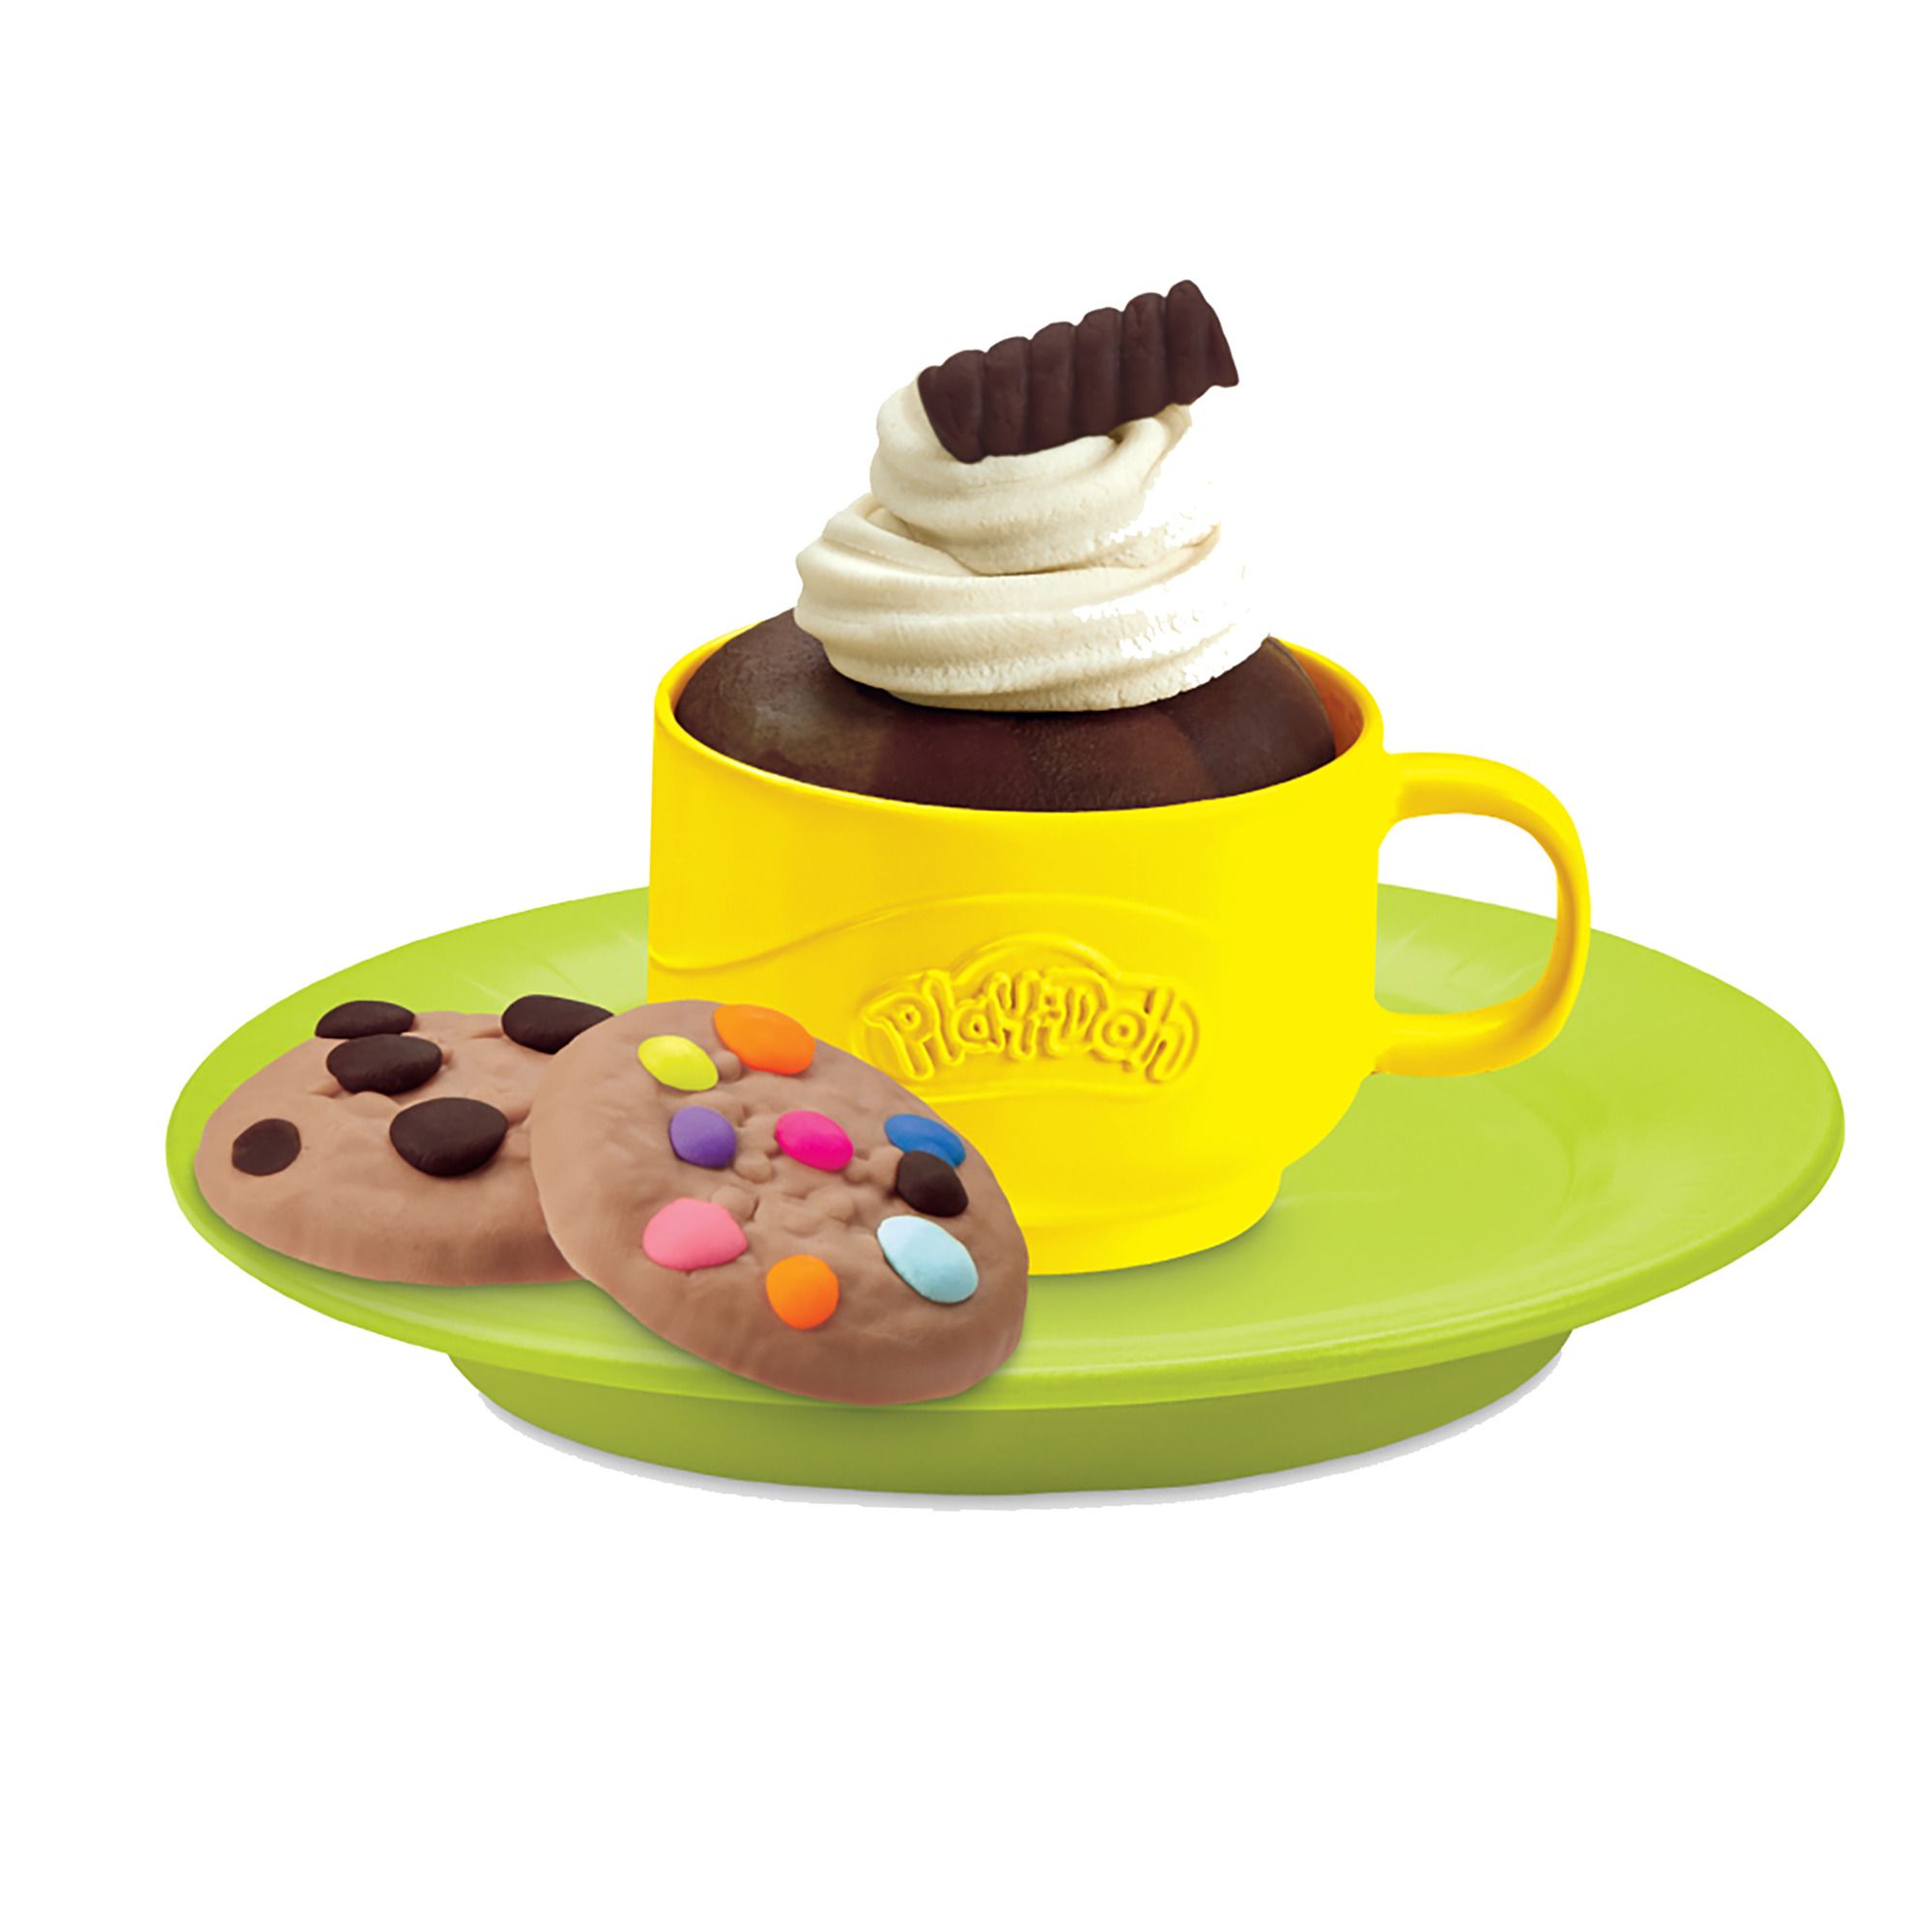 Play-Doh Kitchen Creations Colorful Cafe Play Food Coffee Toy with 5 Colors  - Play-Doh